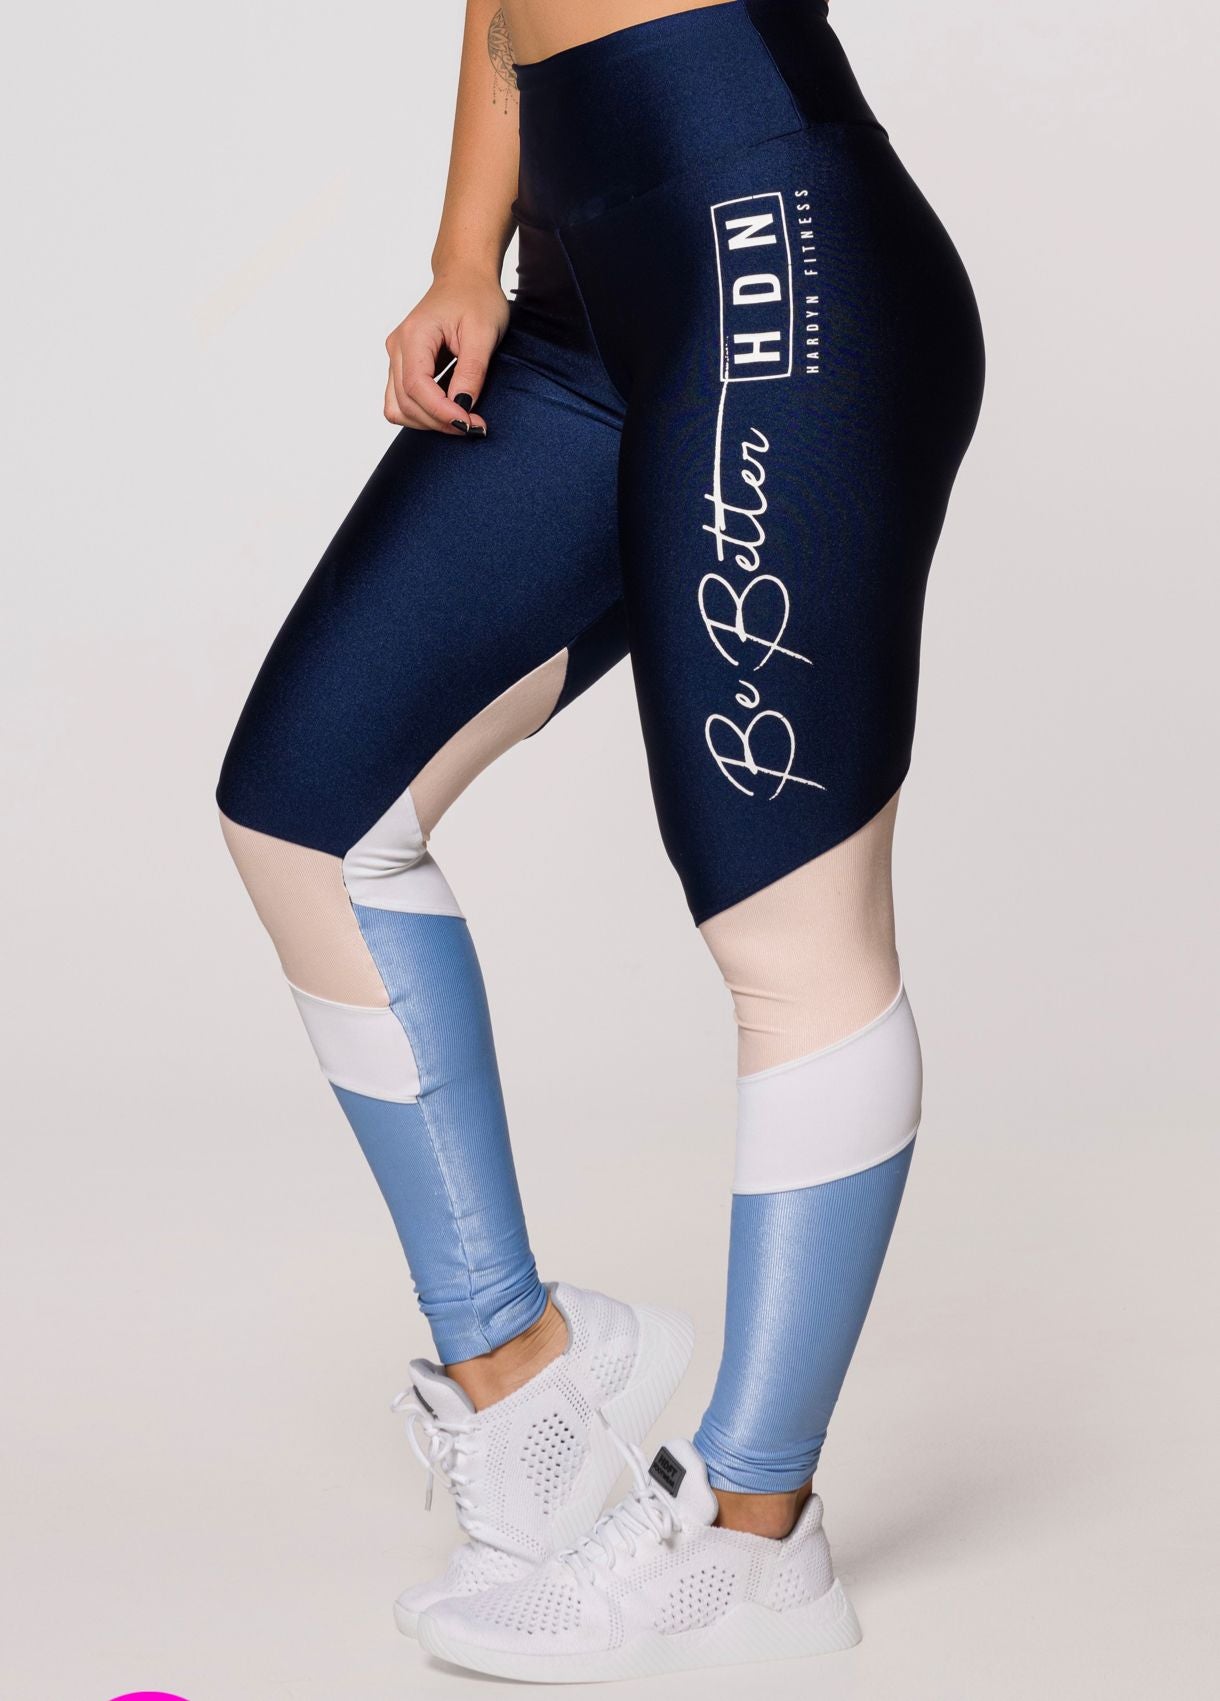 Be Better fitness top and leggings set in marine polyamide with cutouts